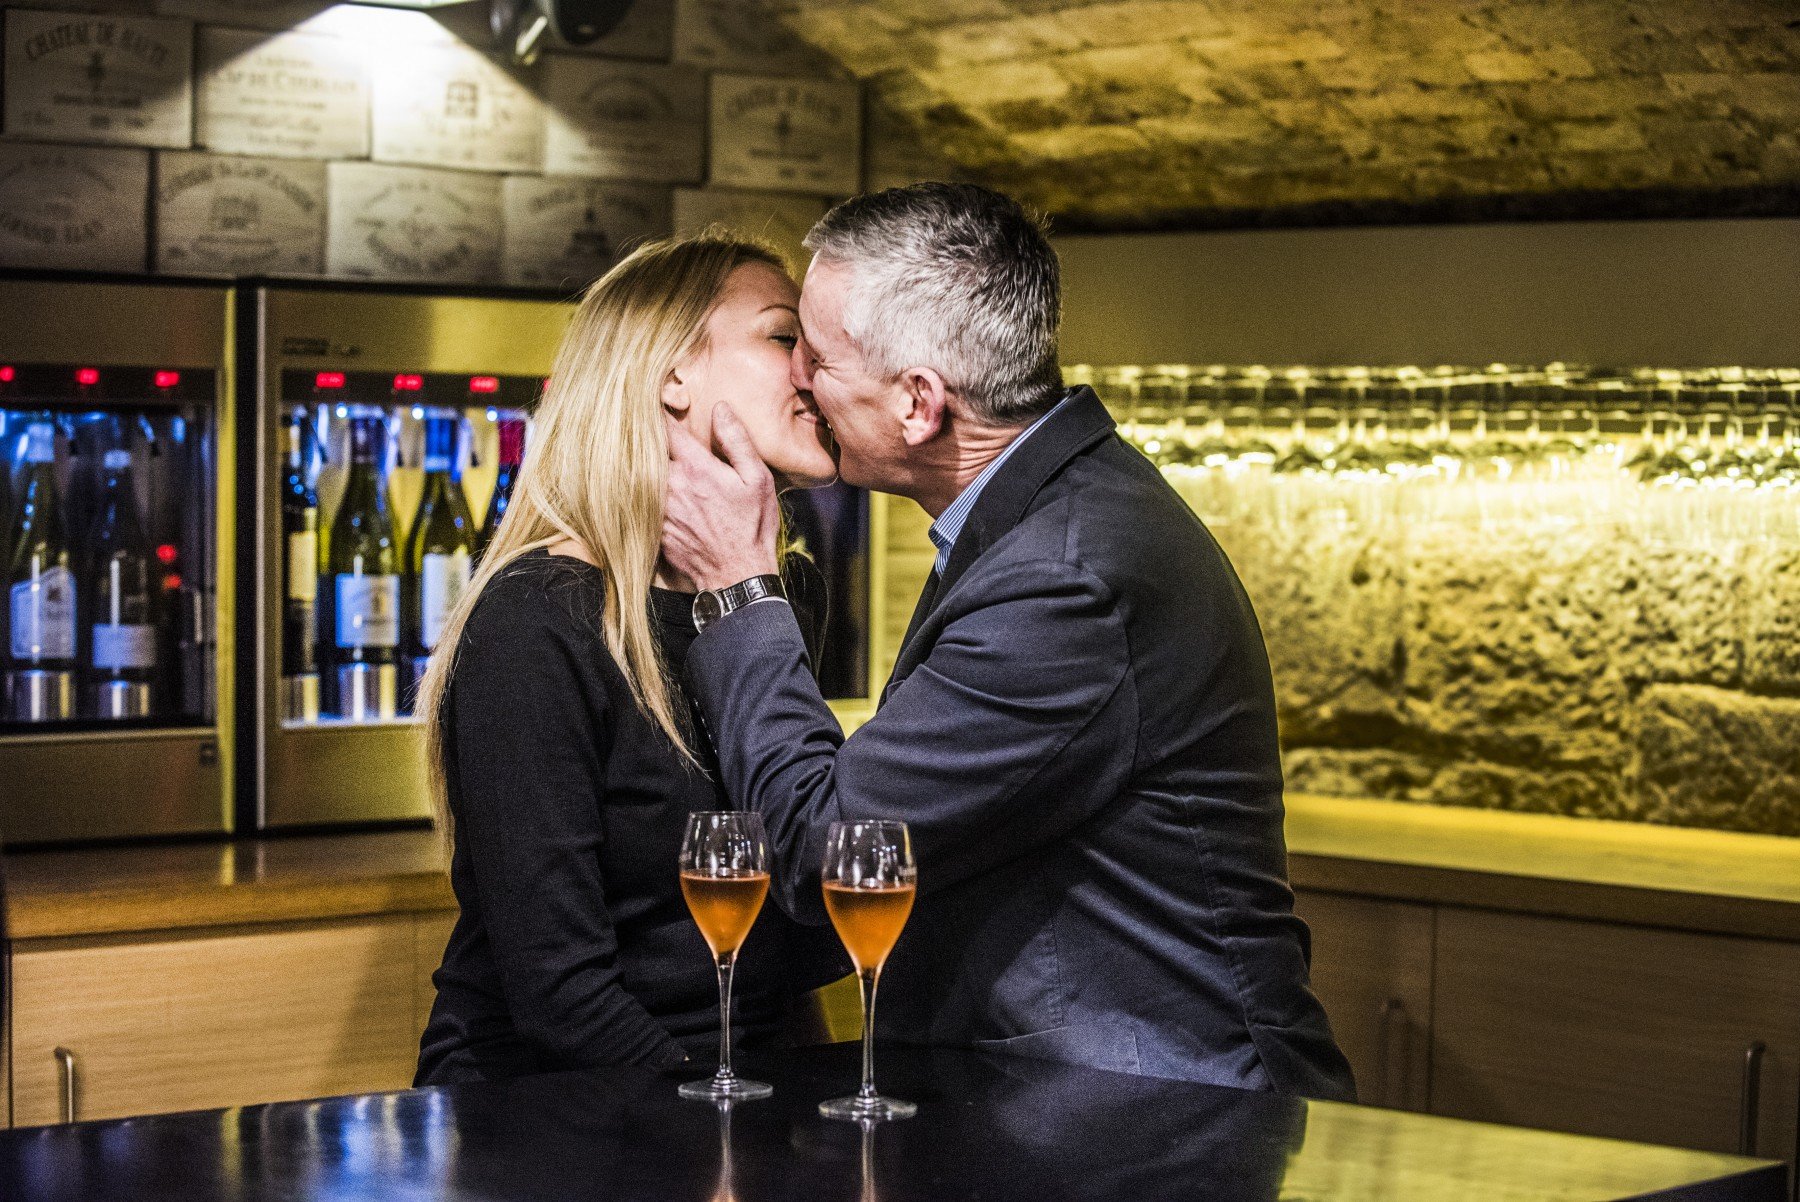 Man and woman kissing in bar with two drinks